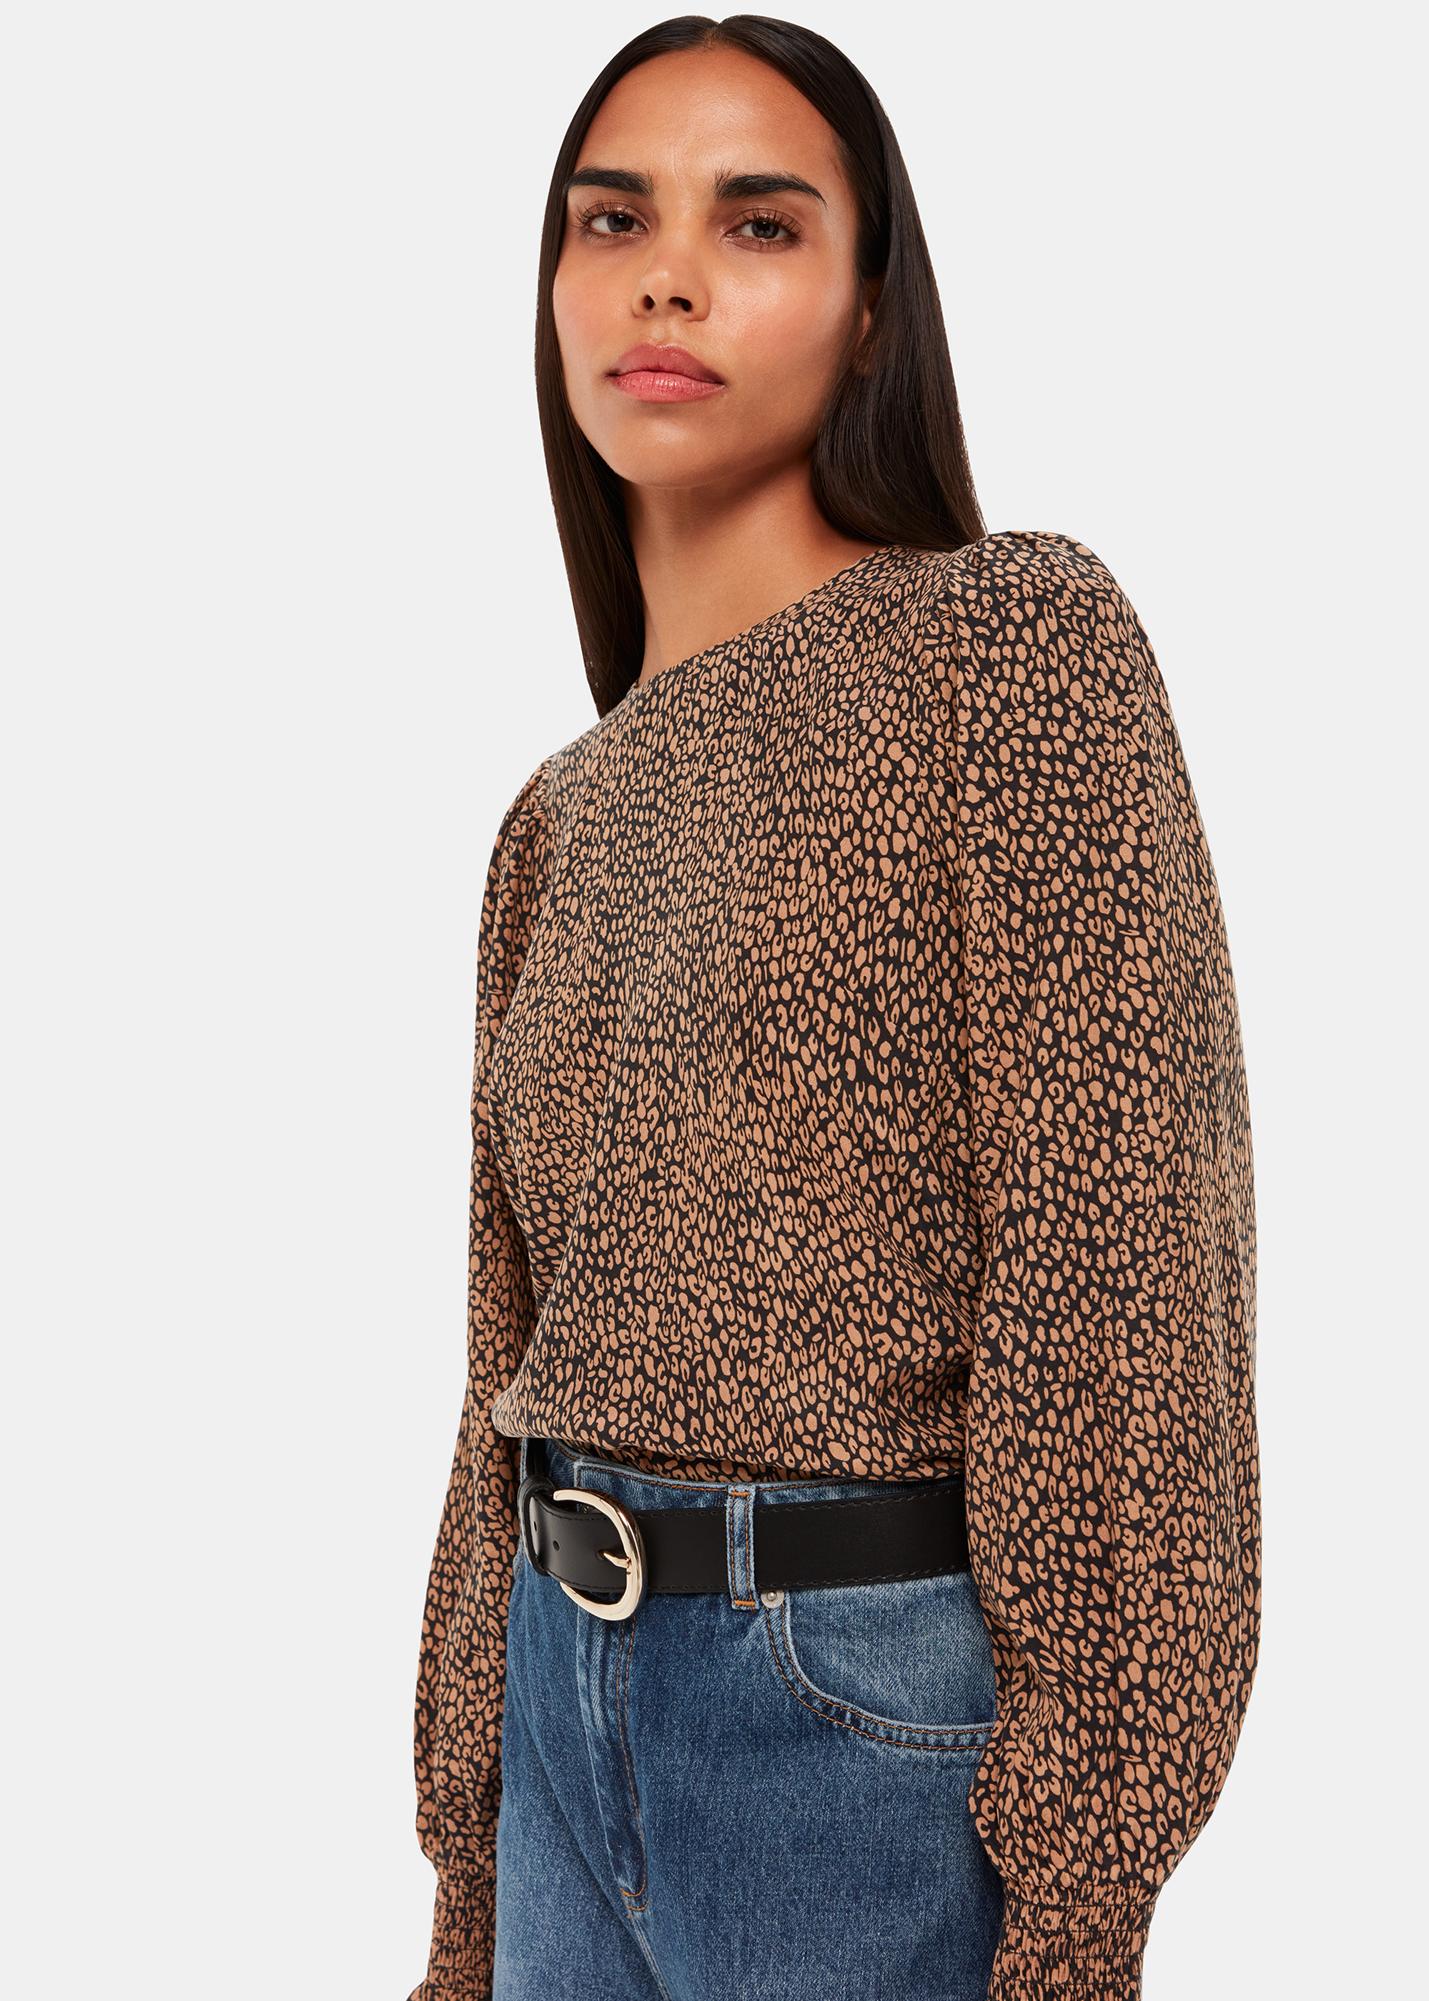 Whistles Coffee Bean Blouse in Brown